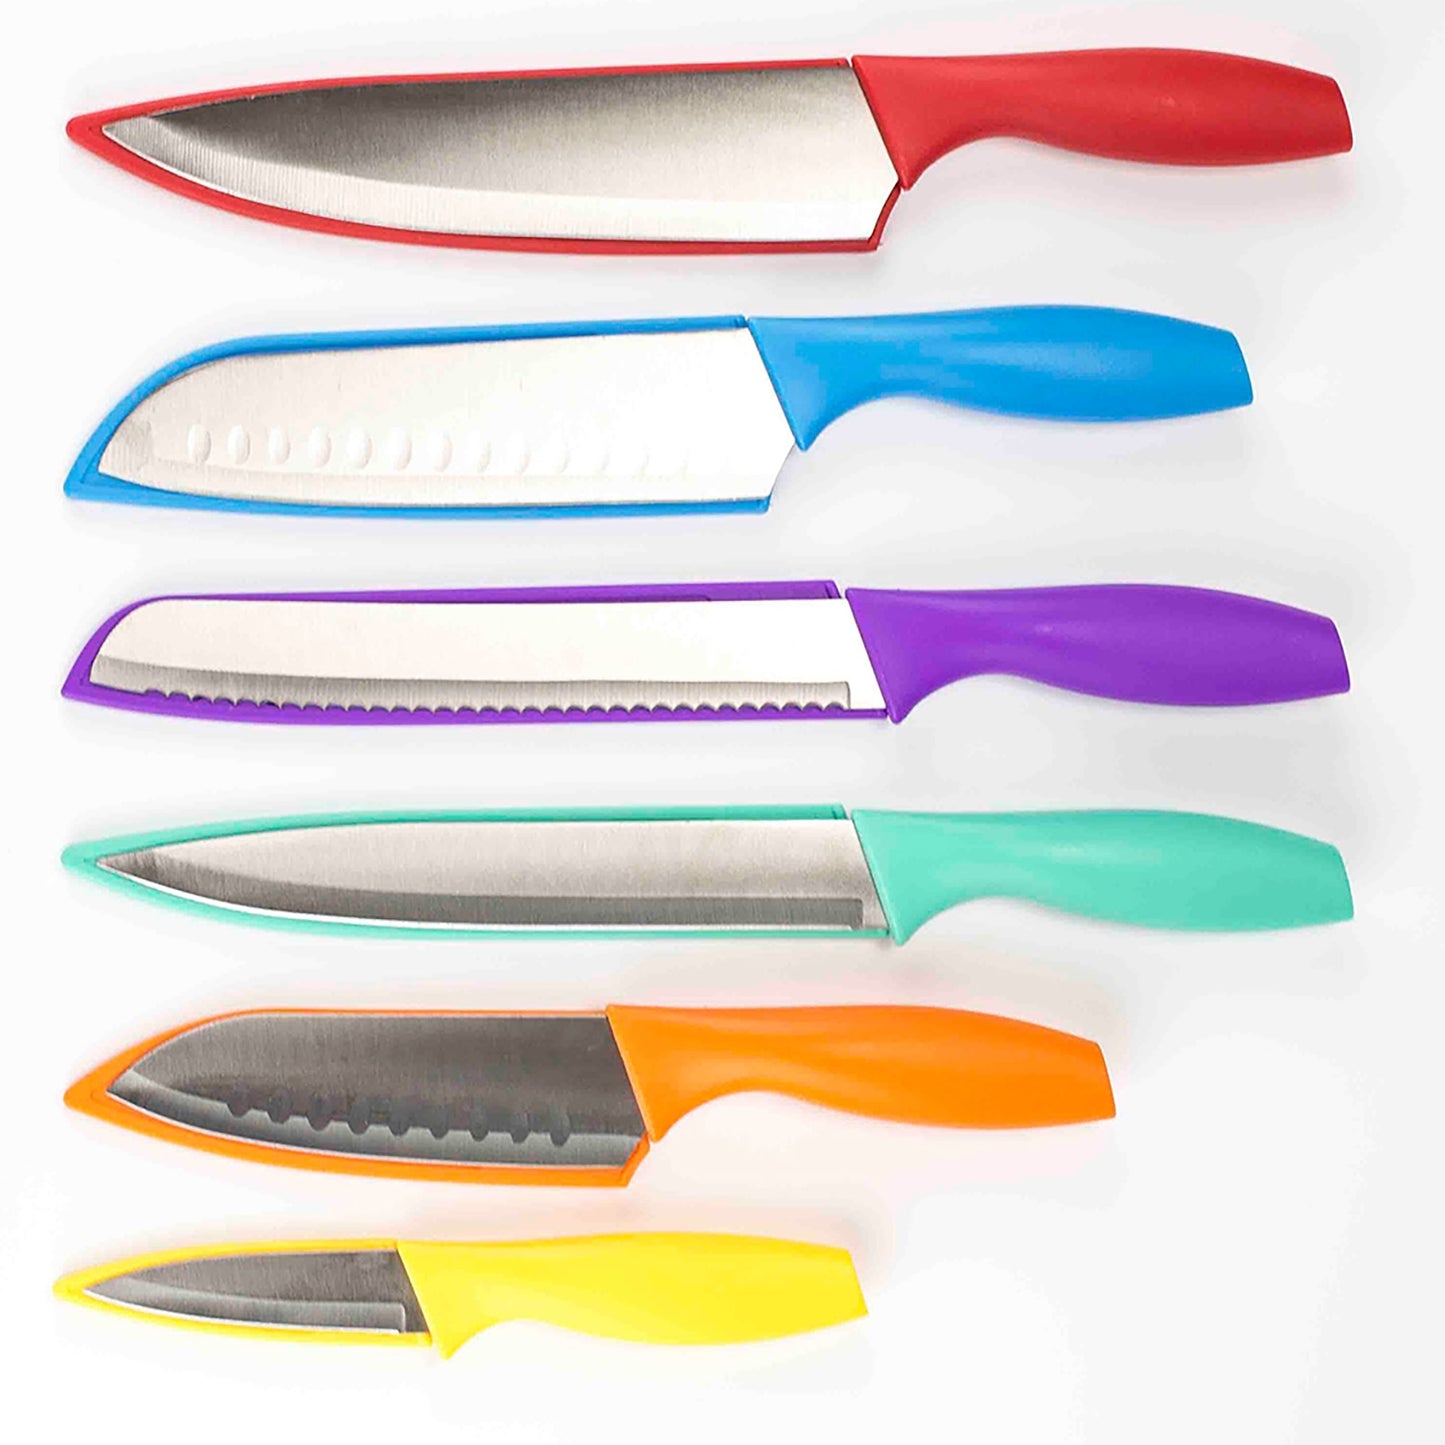 Printed Kitchen Knife - Stainless Steel - Green - Blue - Red - Pink -  ApolloBox